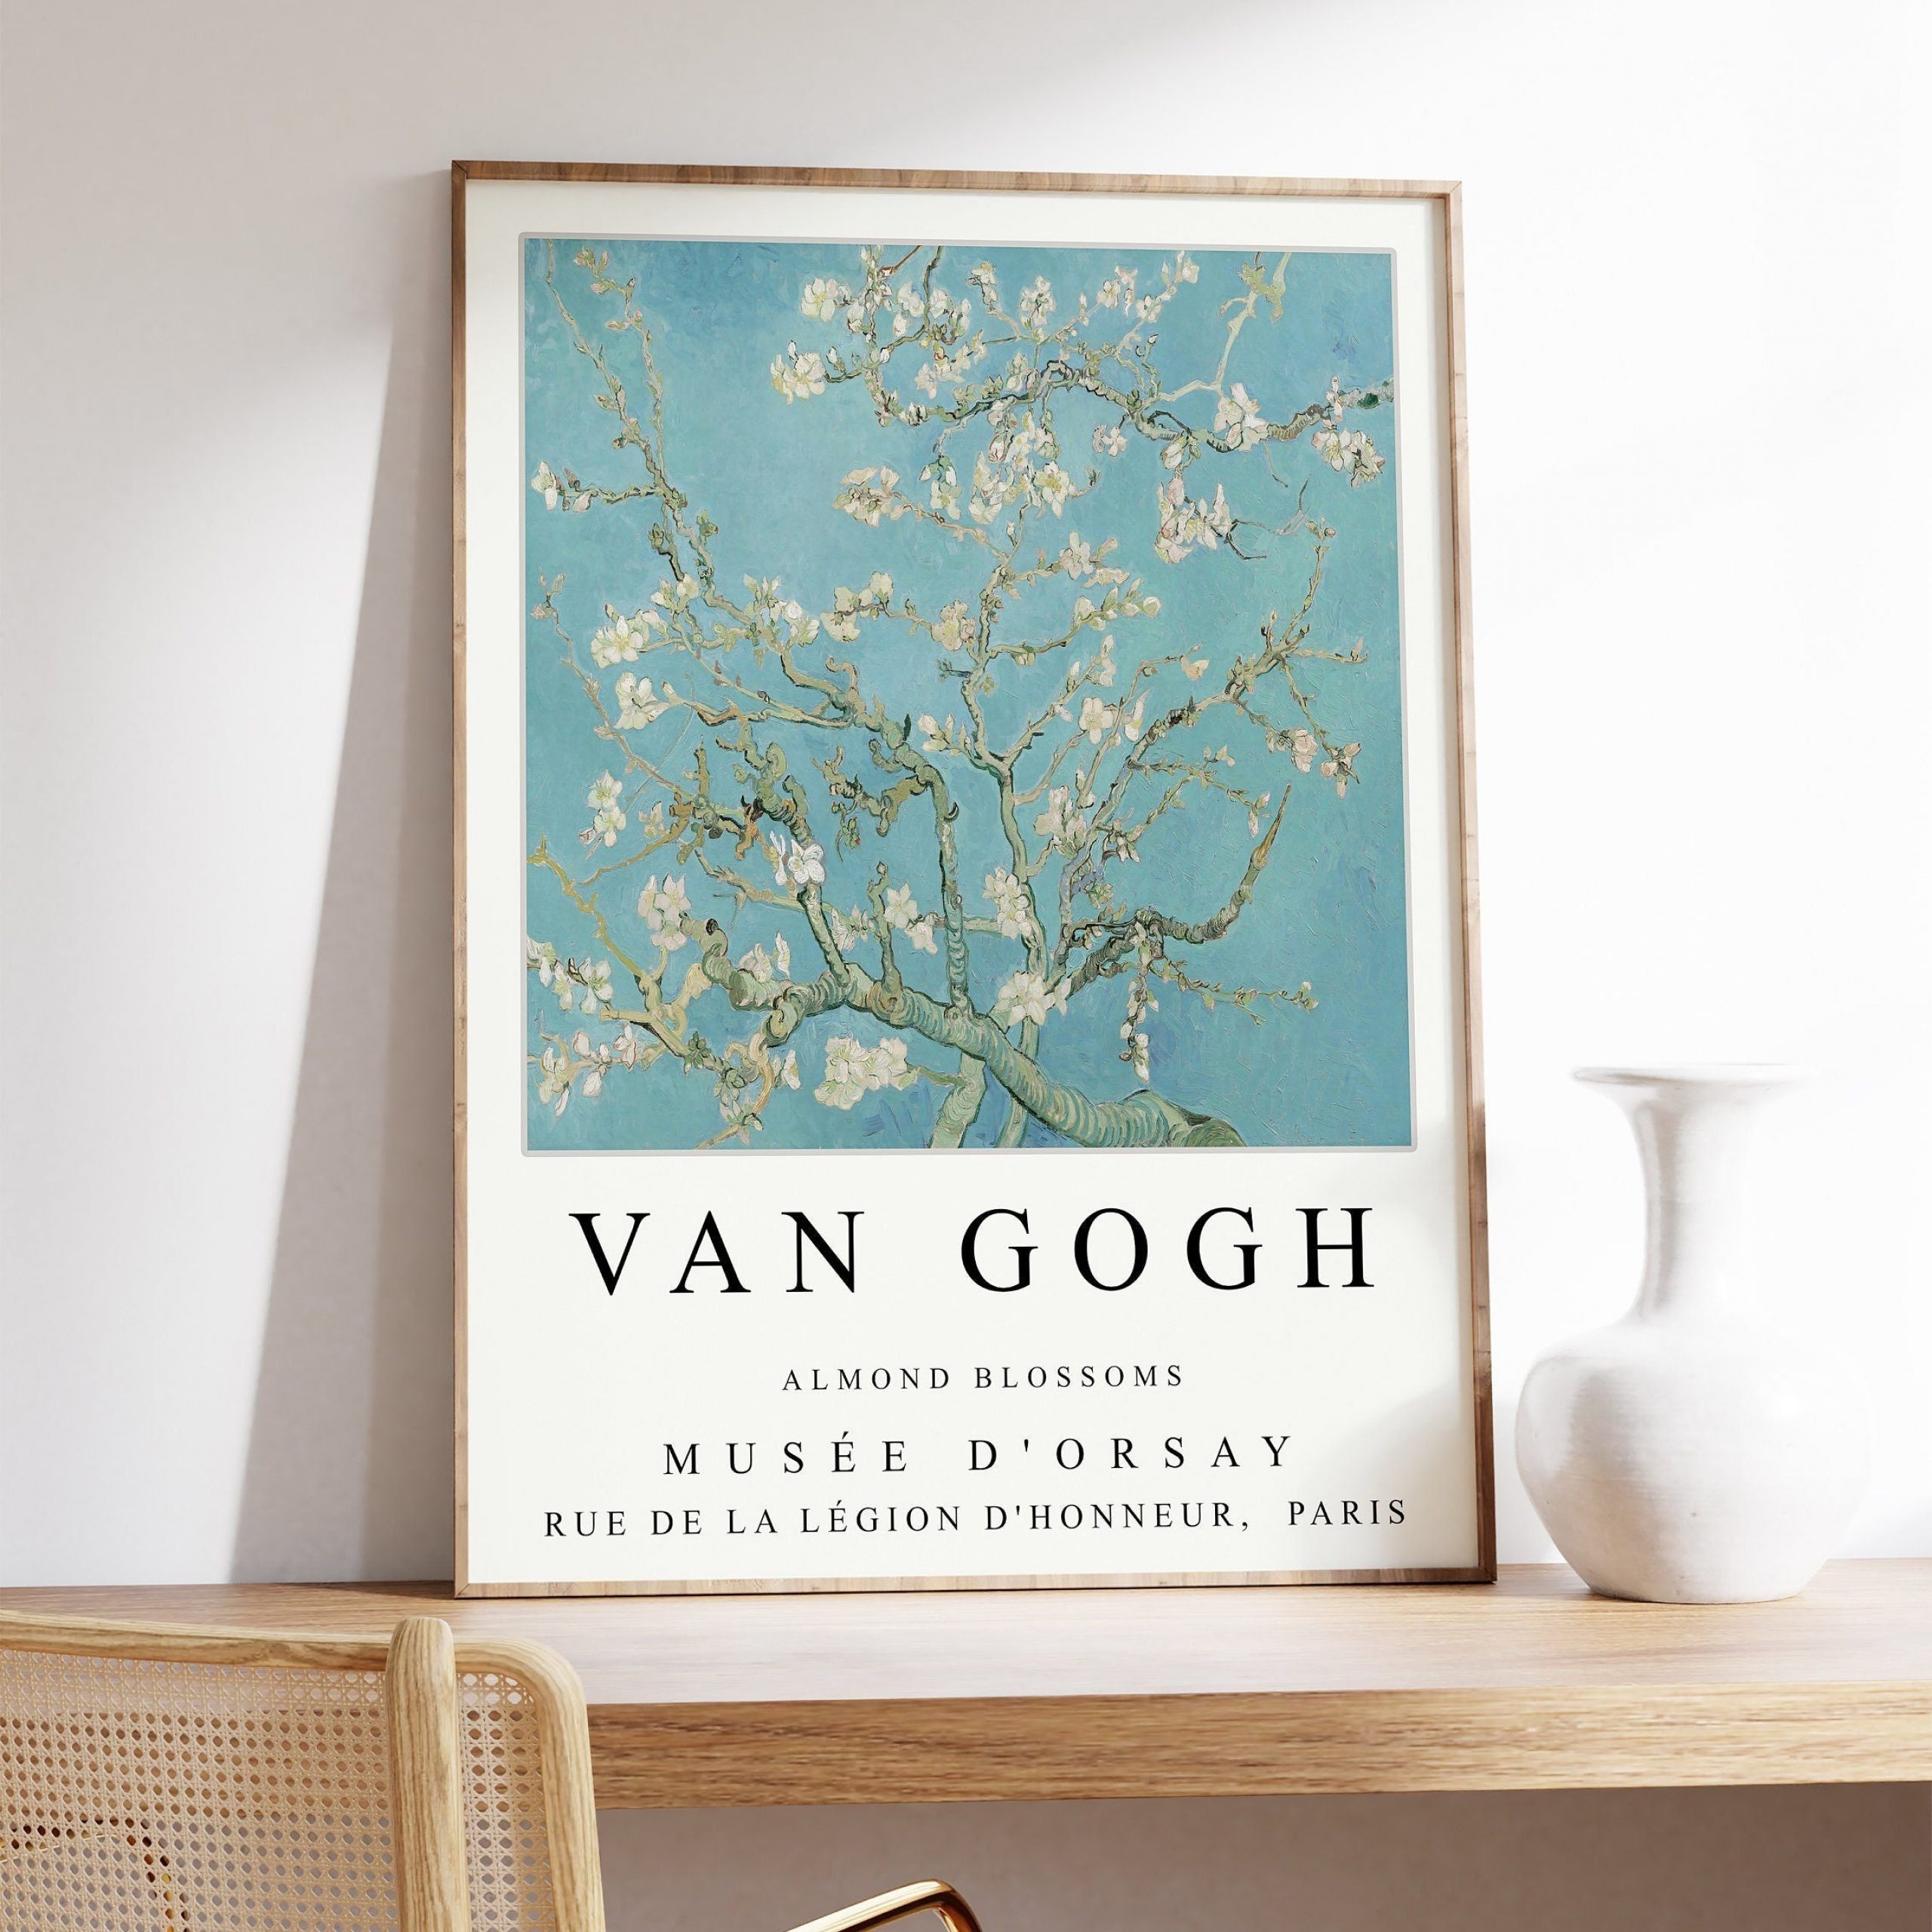 Van Gogh Almond Blossom Print – Etsy France With Most Up To Date Almond Blossoms Wall Art (View 11 of 20)